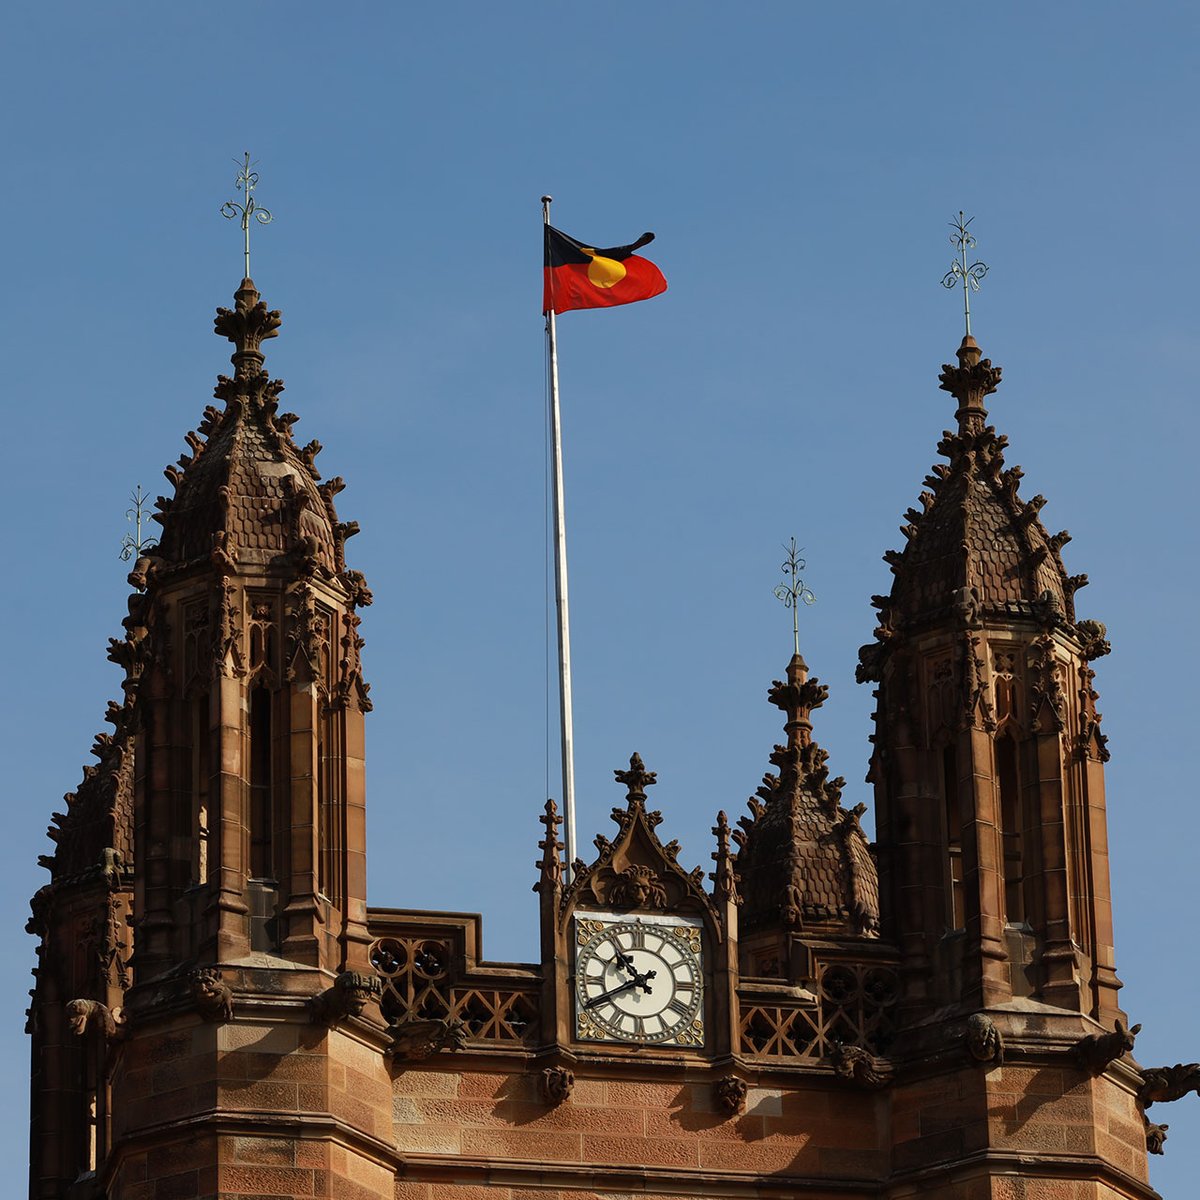 Today, we marked the week-long celebration of NAIDOC Week with a flag raising ceremony on Gadigal Land at the University of Sydney Quadrangle.

Learn more about how we’re recognising and celebrating #NAIDOC2023: sydneyuni.co/43bABqy

#LeadershipForGood #ForOurElders